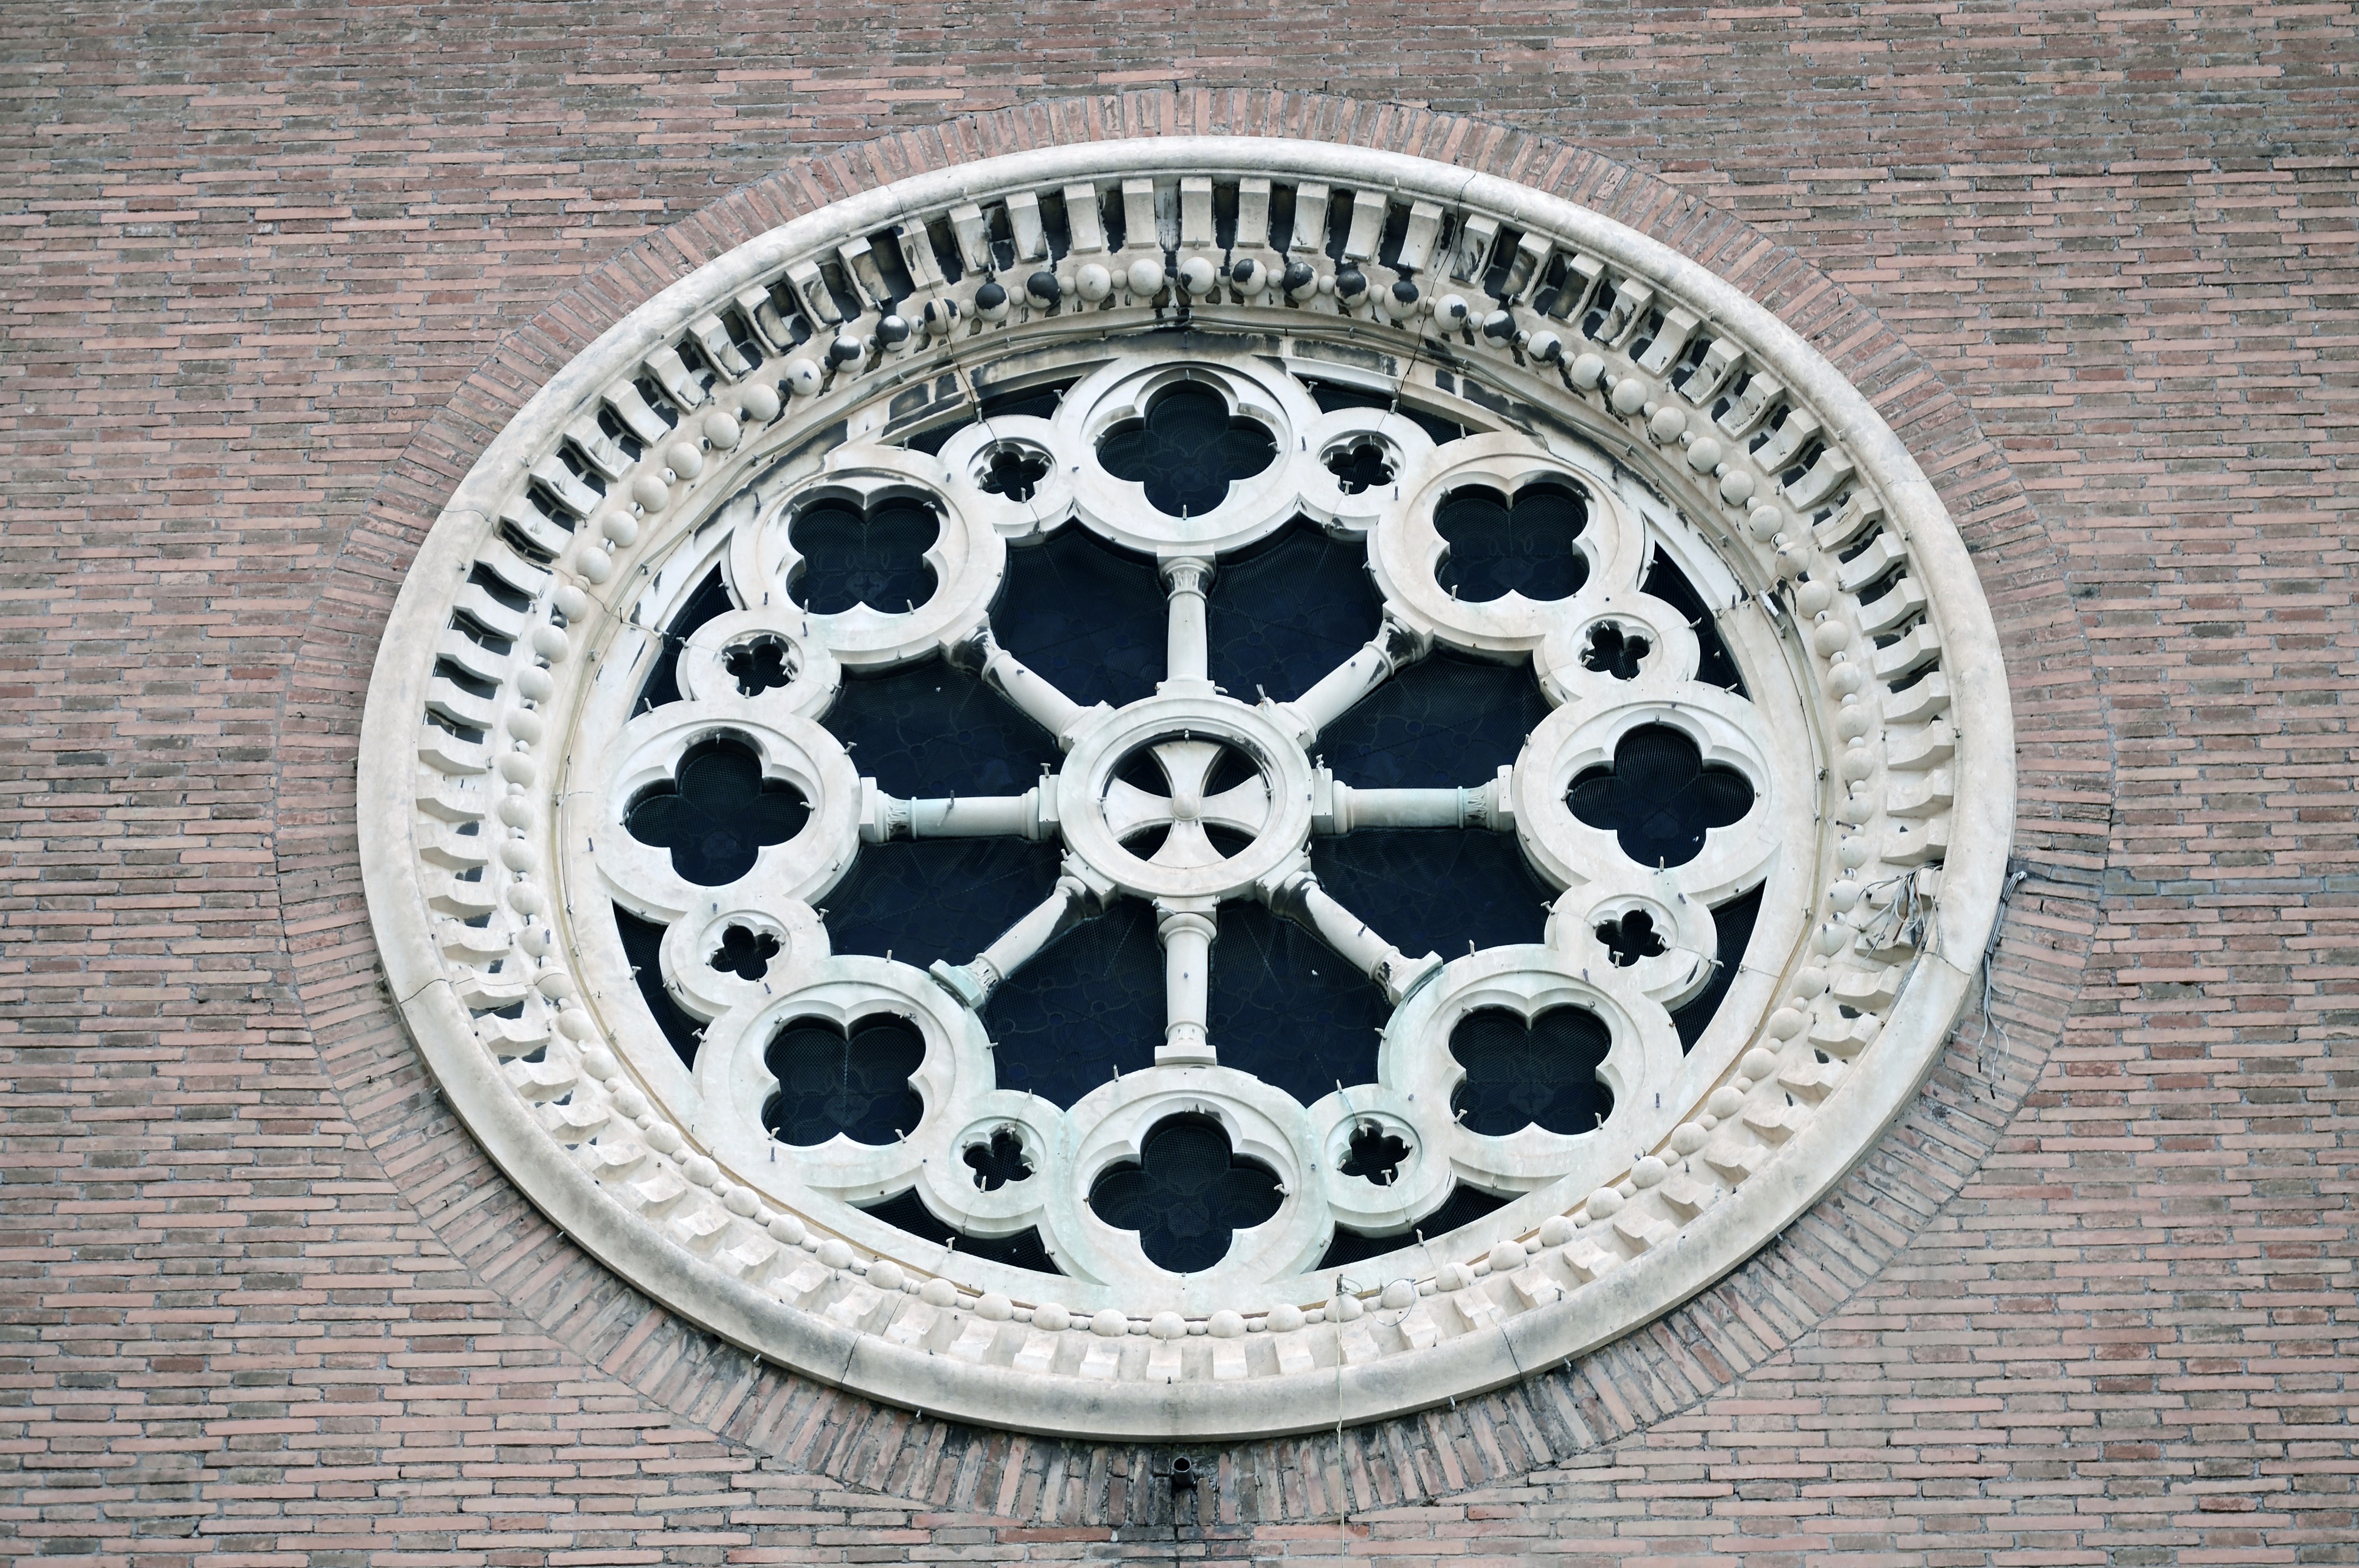 Rose window of Church of St Mary Immaculate and St. John Berchmans